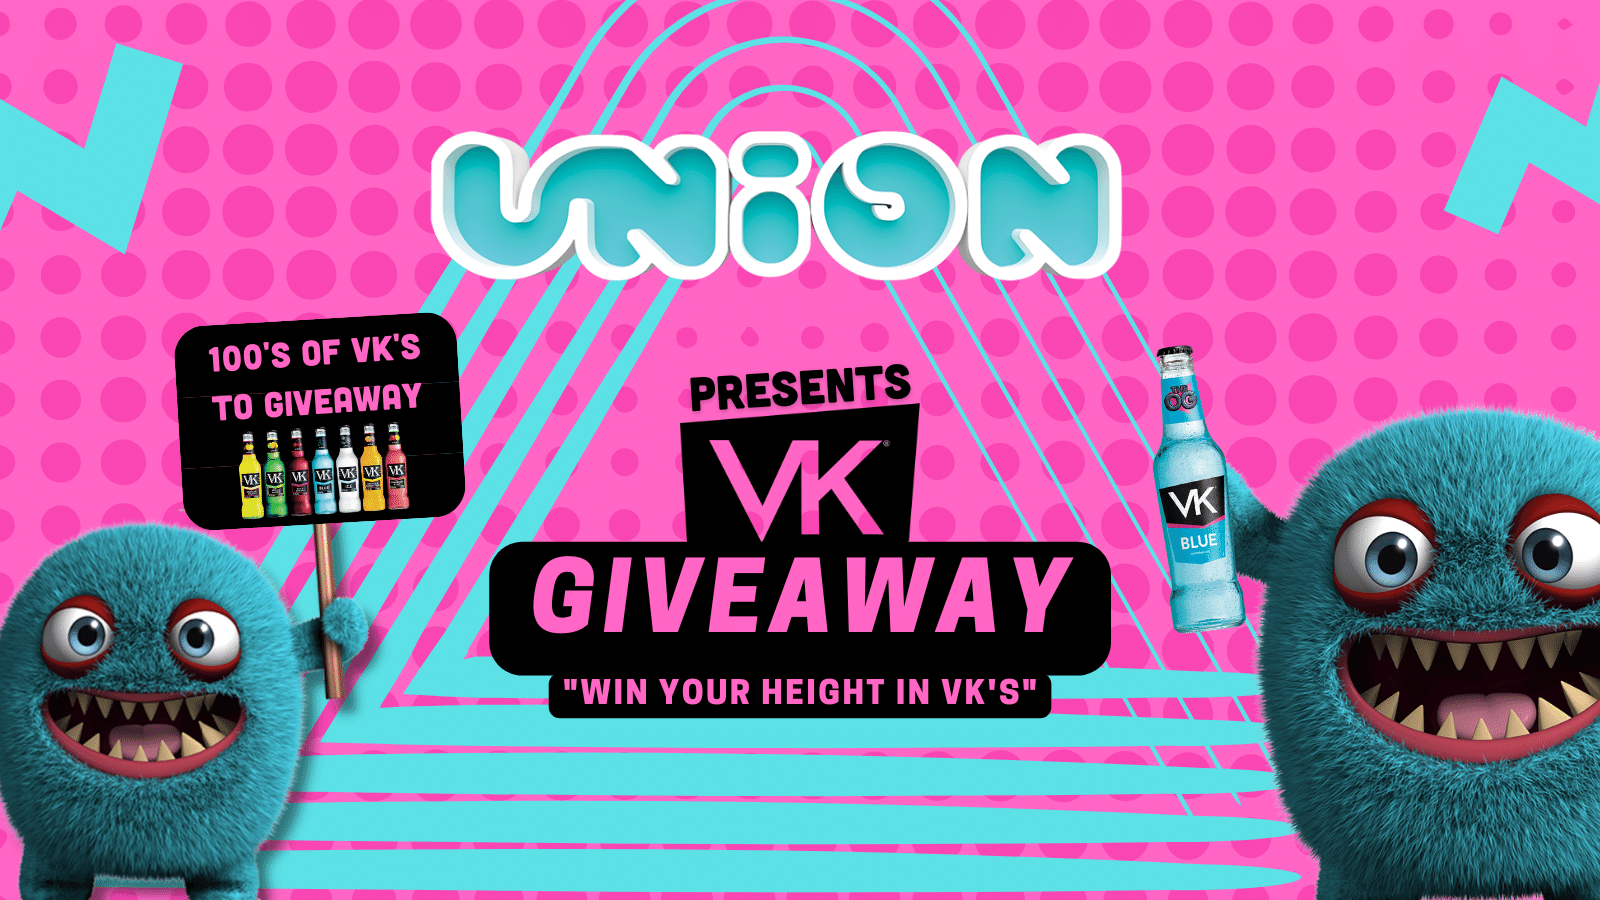 UNION TUESDAY’S PRESENTS THE VK GIVEAWAY